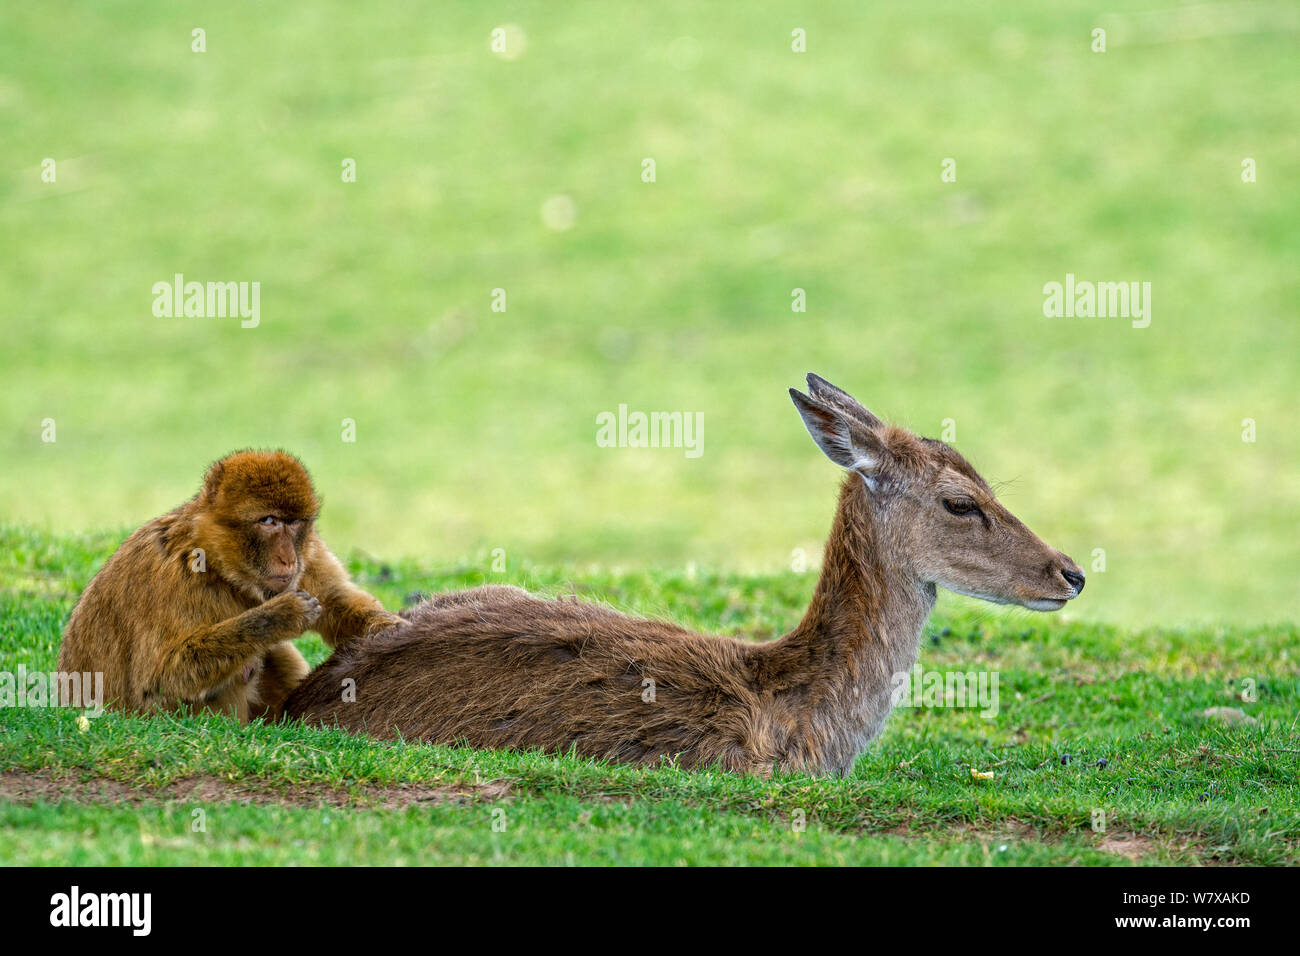 Barbary macaque (Macaca sylvanus) grooming deer, Cabarceno Park, Cantabria, Spain. Captive, occurs in Northern Africa and Gibraltar. Stock Photo